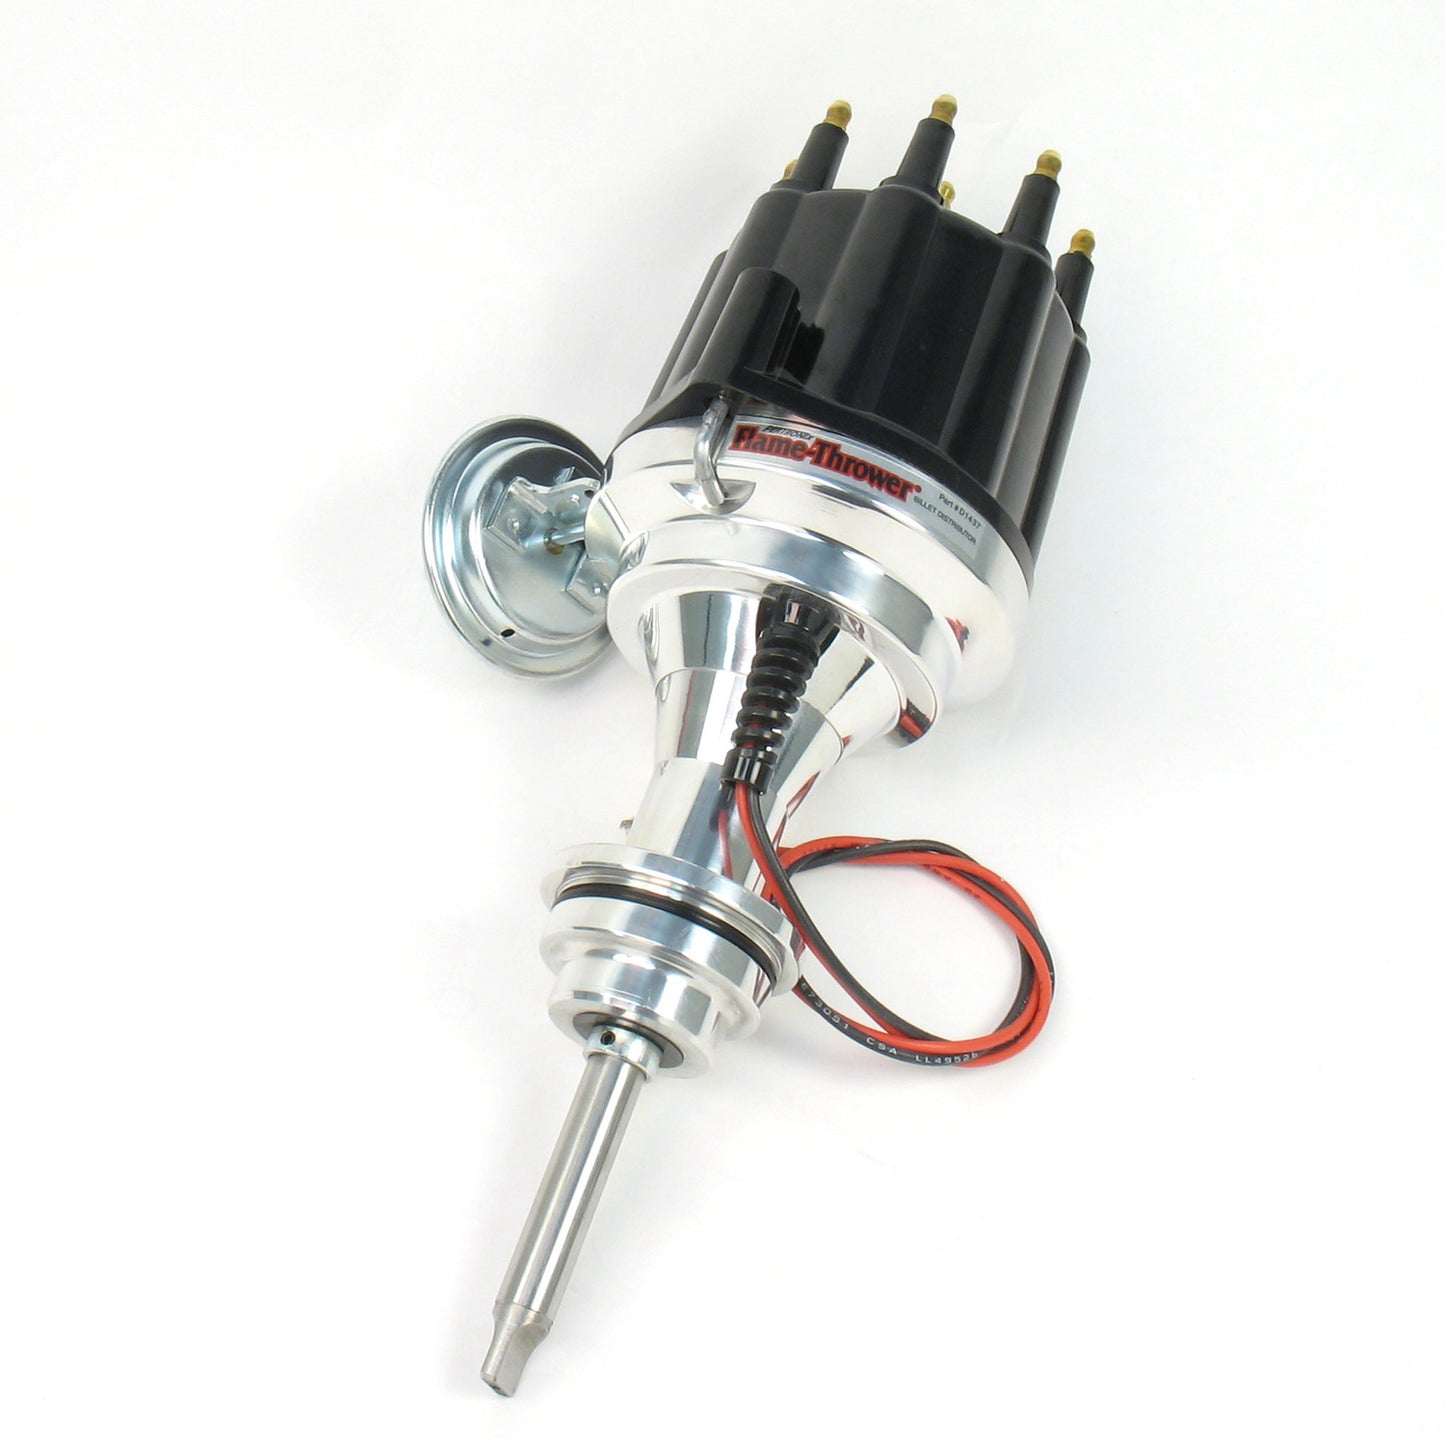 PerTronix D143710 Flame-Thrower Electronic Distributor Billet Chrysler/Dodge/Plymouth 426-440 Plug and Play with Ignitor II Technology Vacuum Advance Black Male Cap